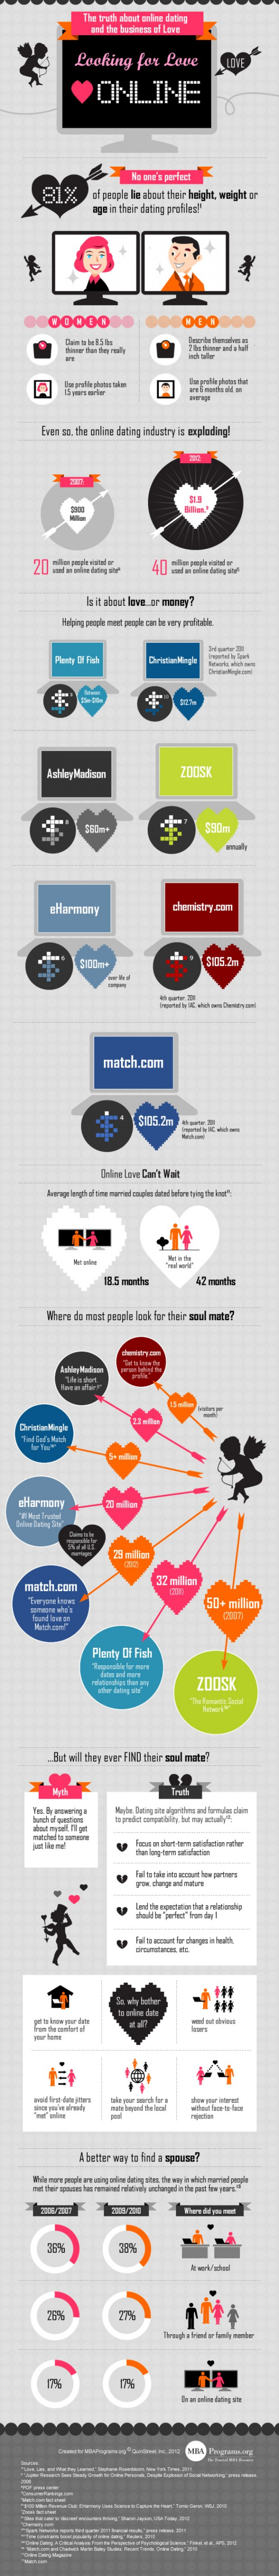 The Logic of Online Lovin': Does online dating work? Infographic